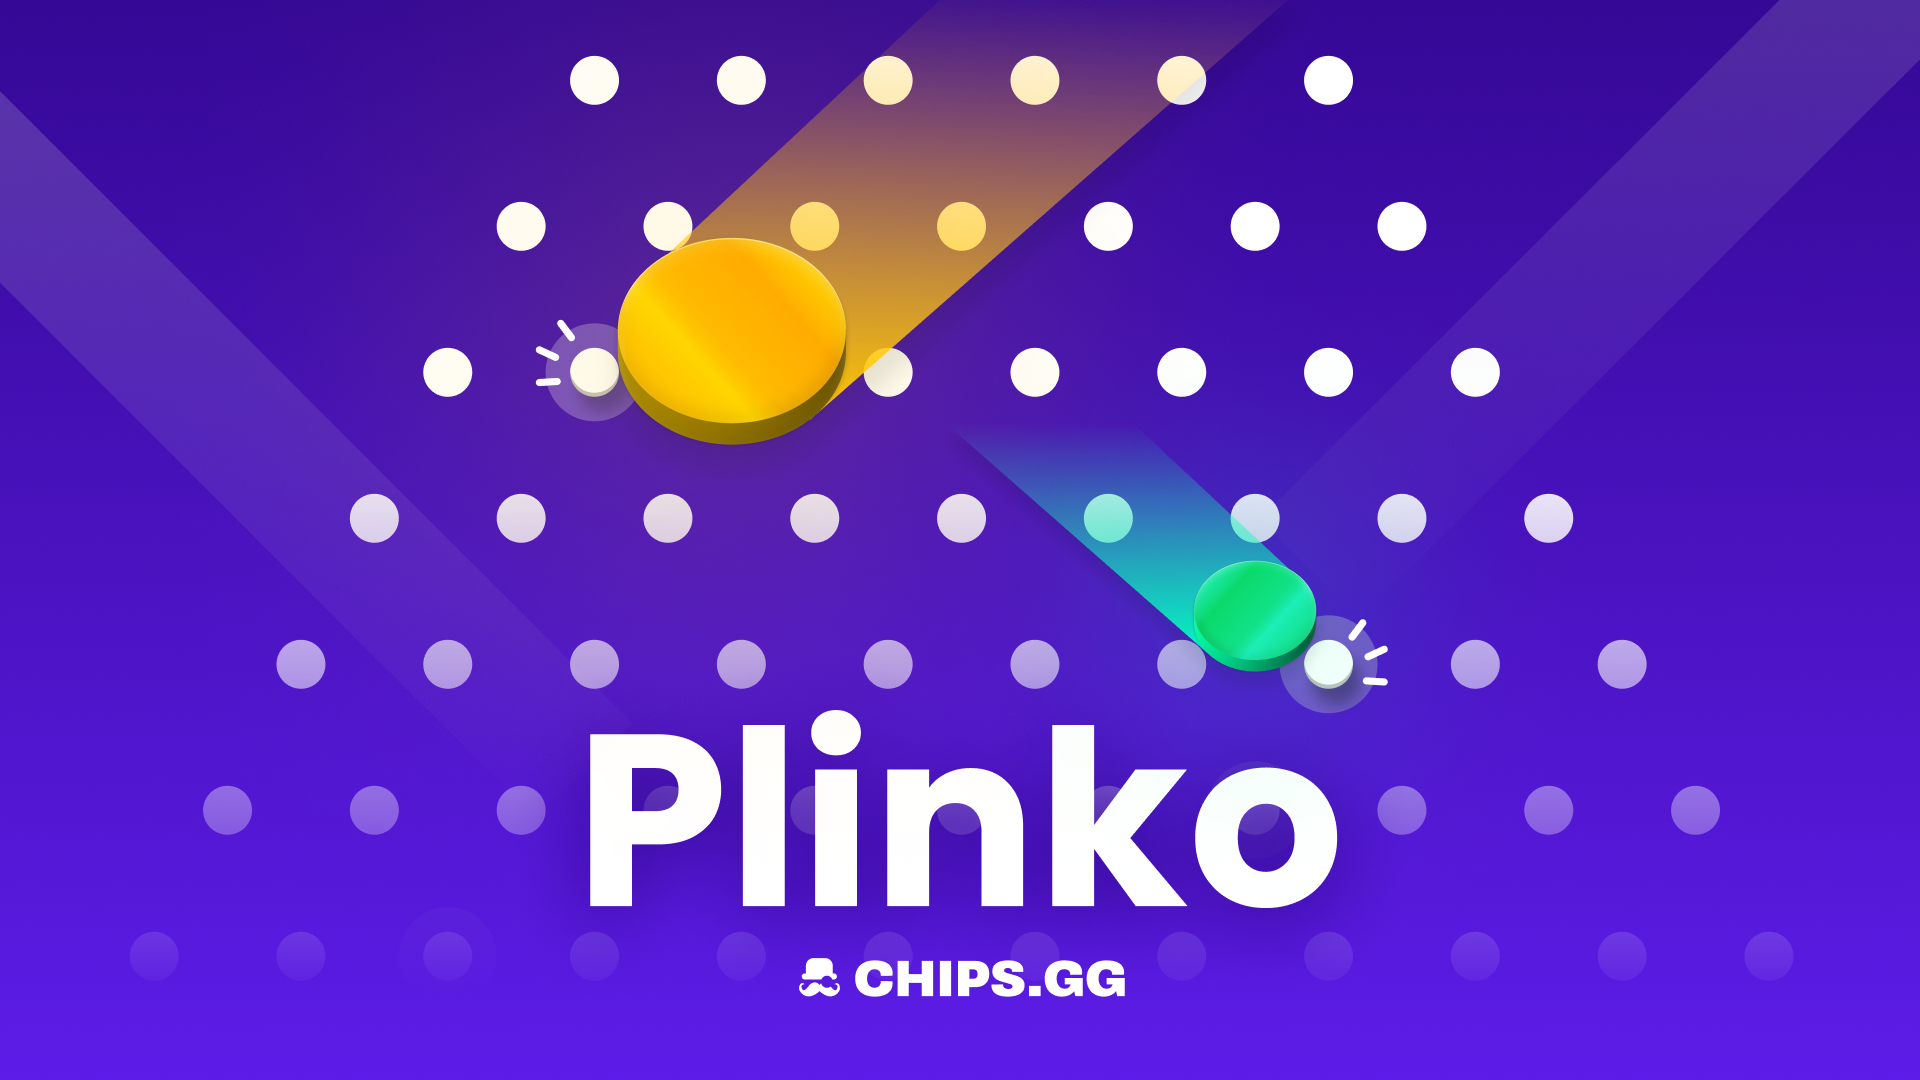 Plinko game graphic with colorful chips and 'CHIPS.GG' branding.